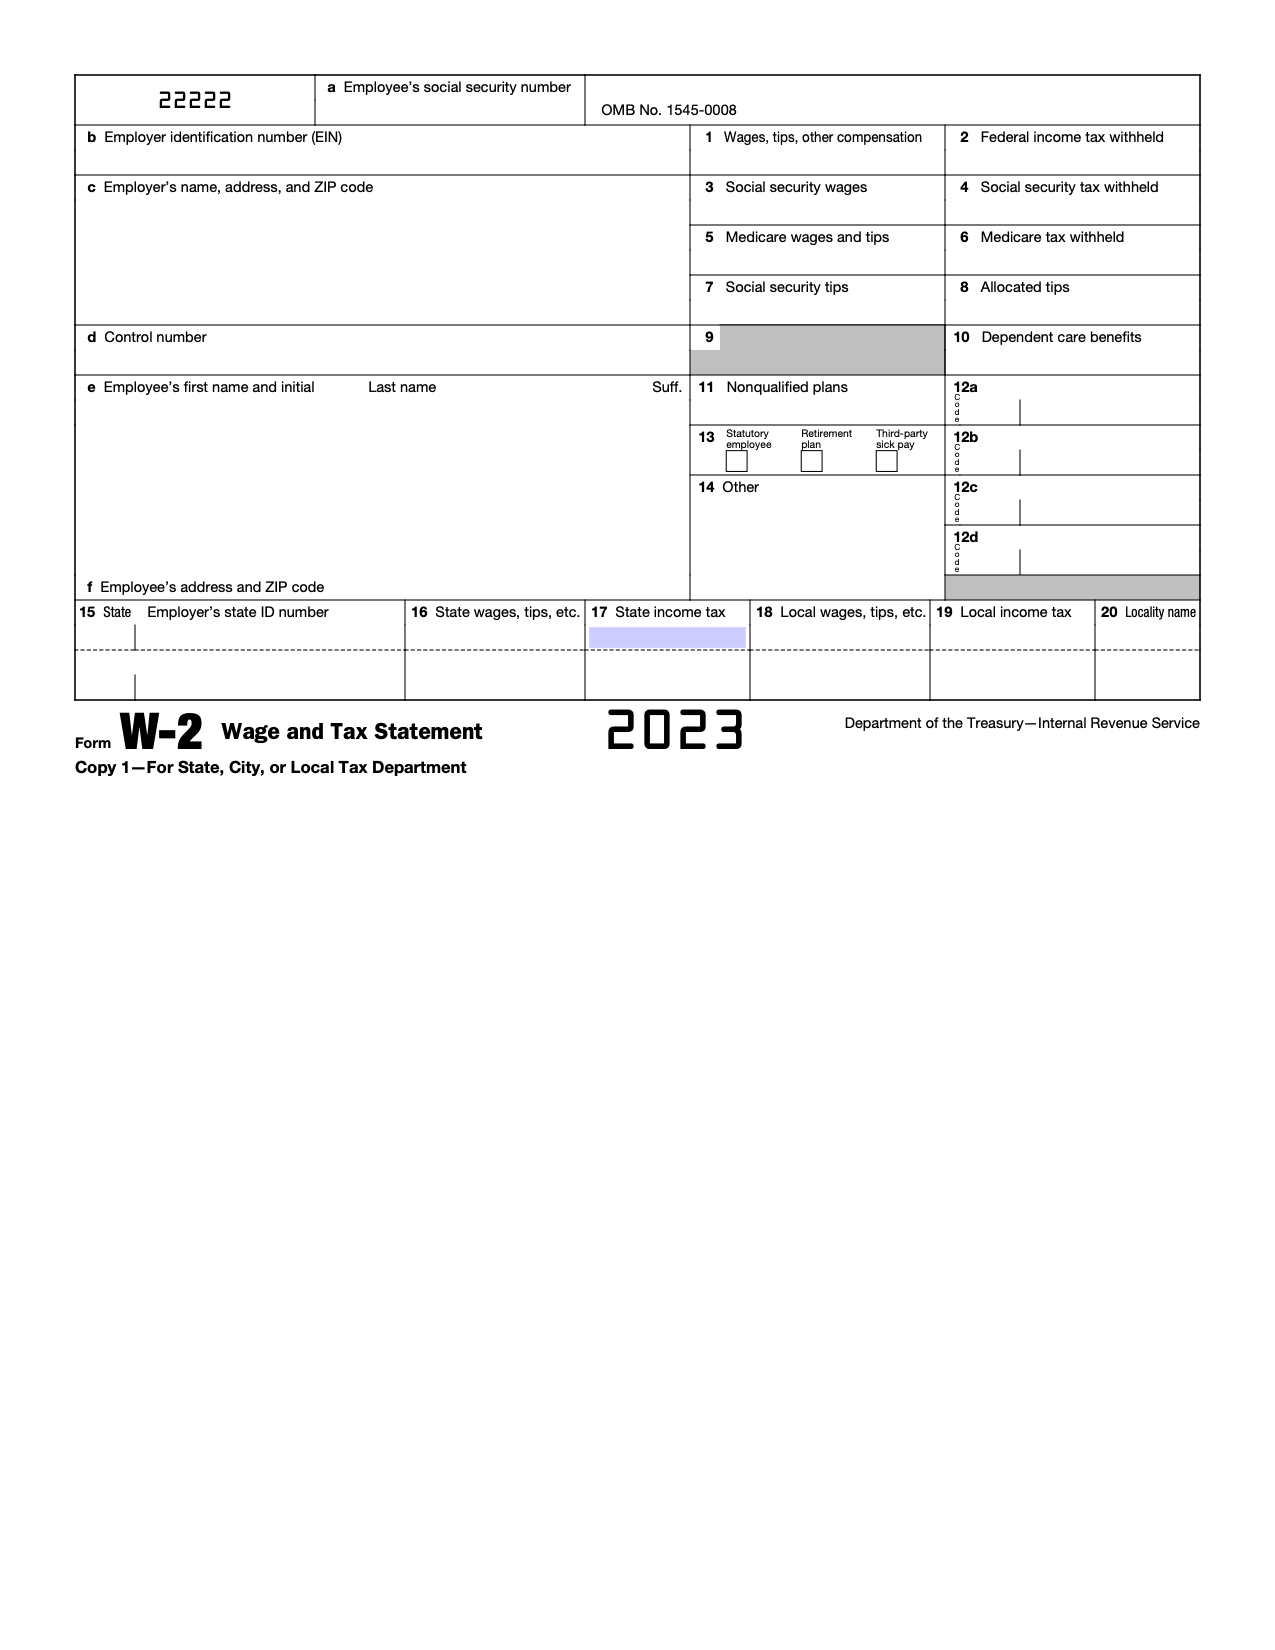 Free Irs Form W-2 | Wage And Tax Statement - Pdf – Eforms intended for Download My W2 Form